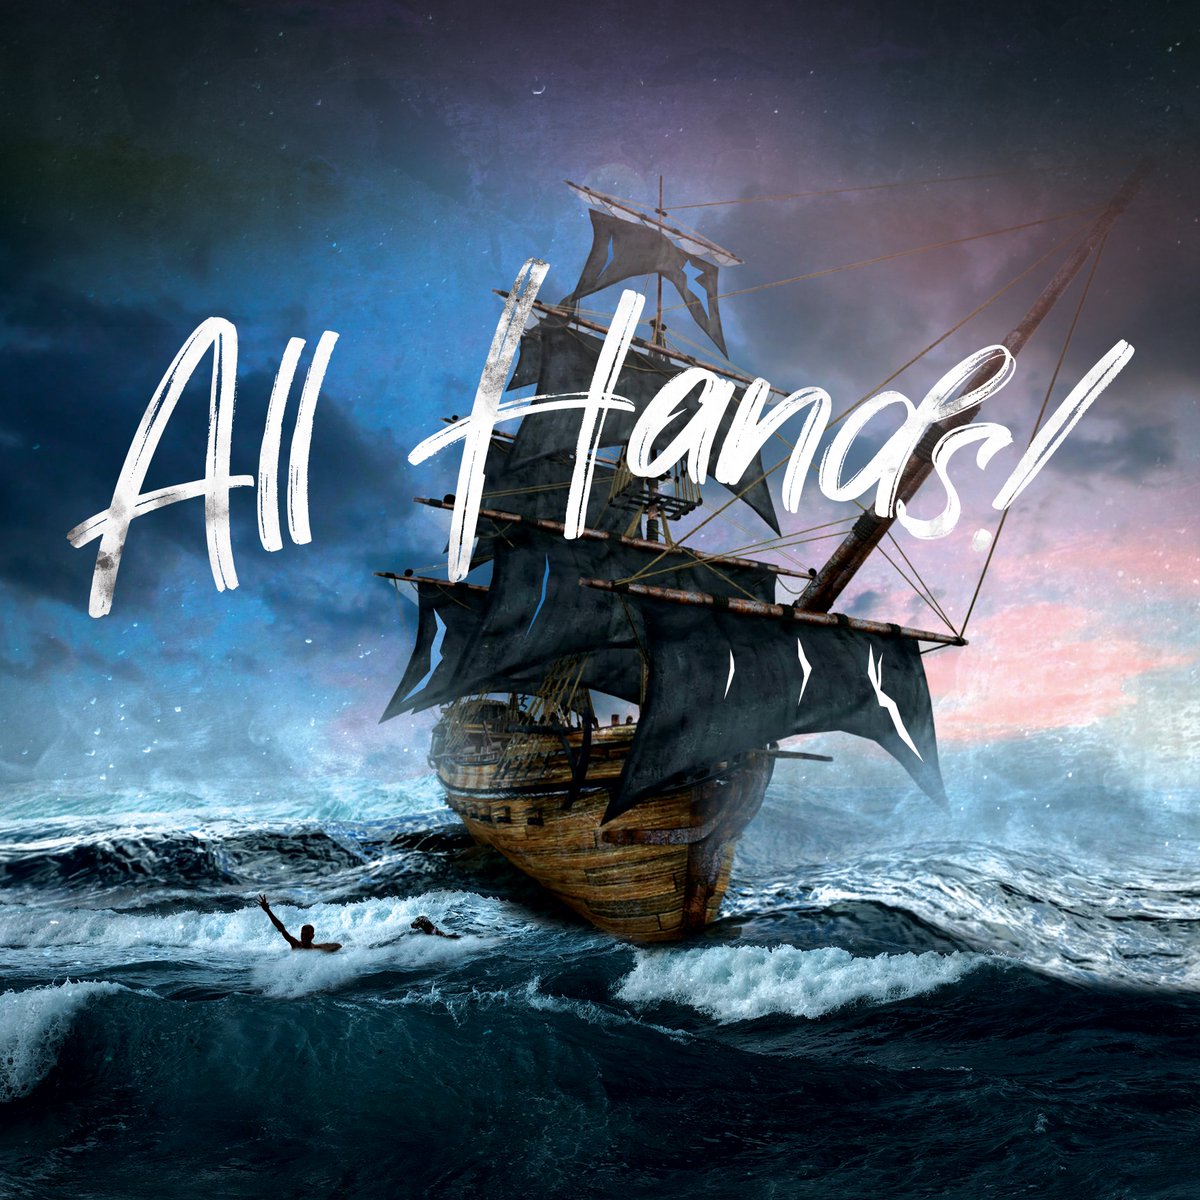 Have you got your tickets for All Hands! yet? Seven performances, 3-6 August, Pay What You Choose between £4-£20. #theatre #bsl #history #Somerset